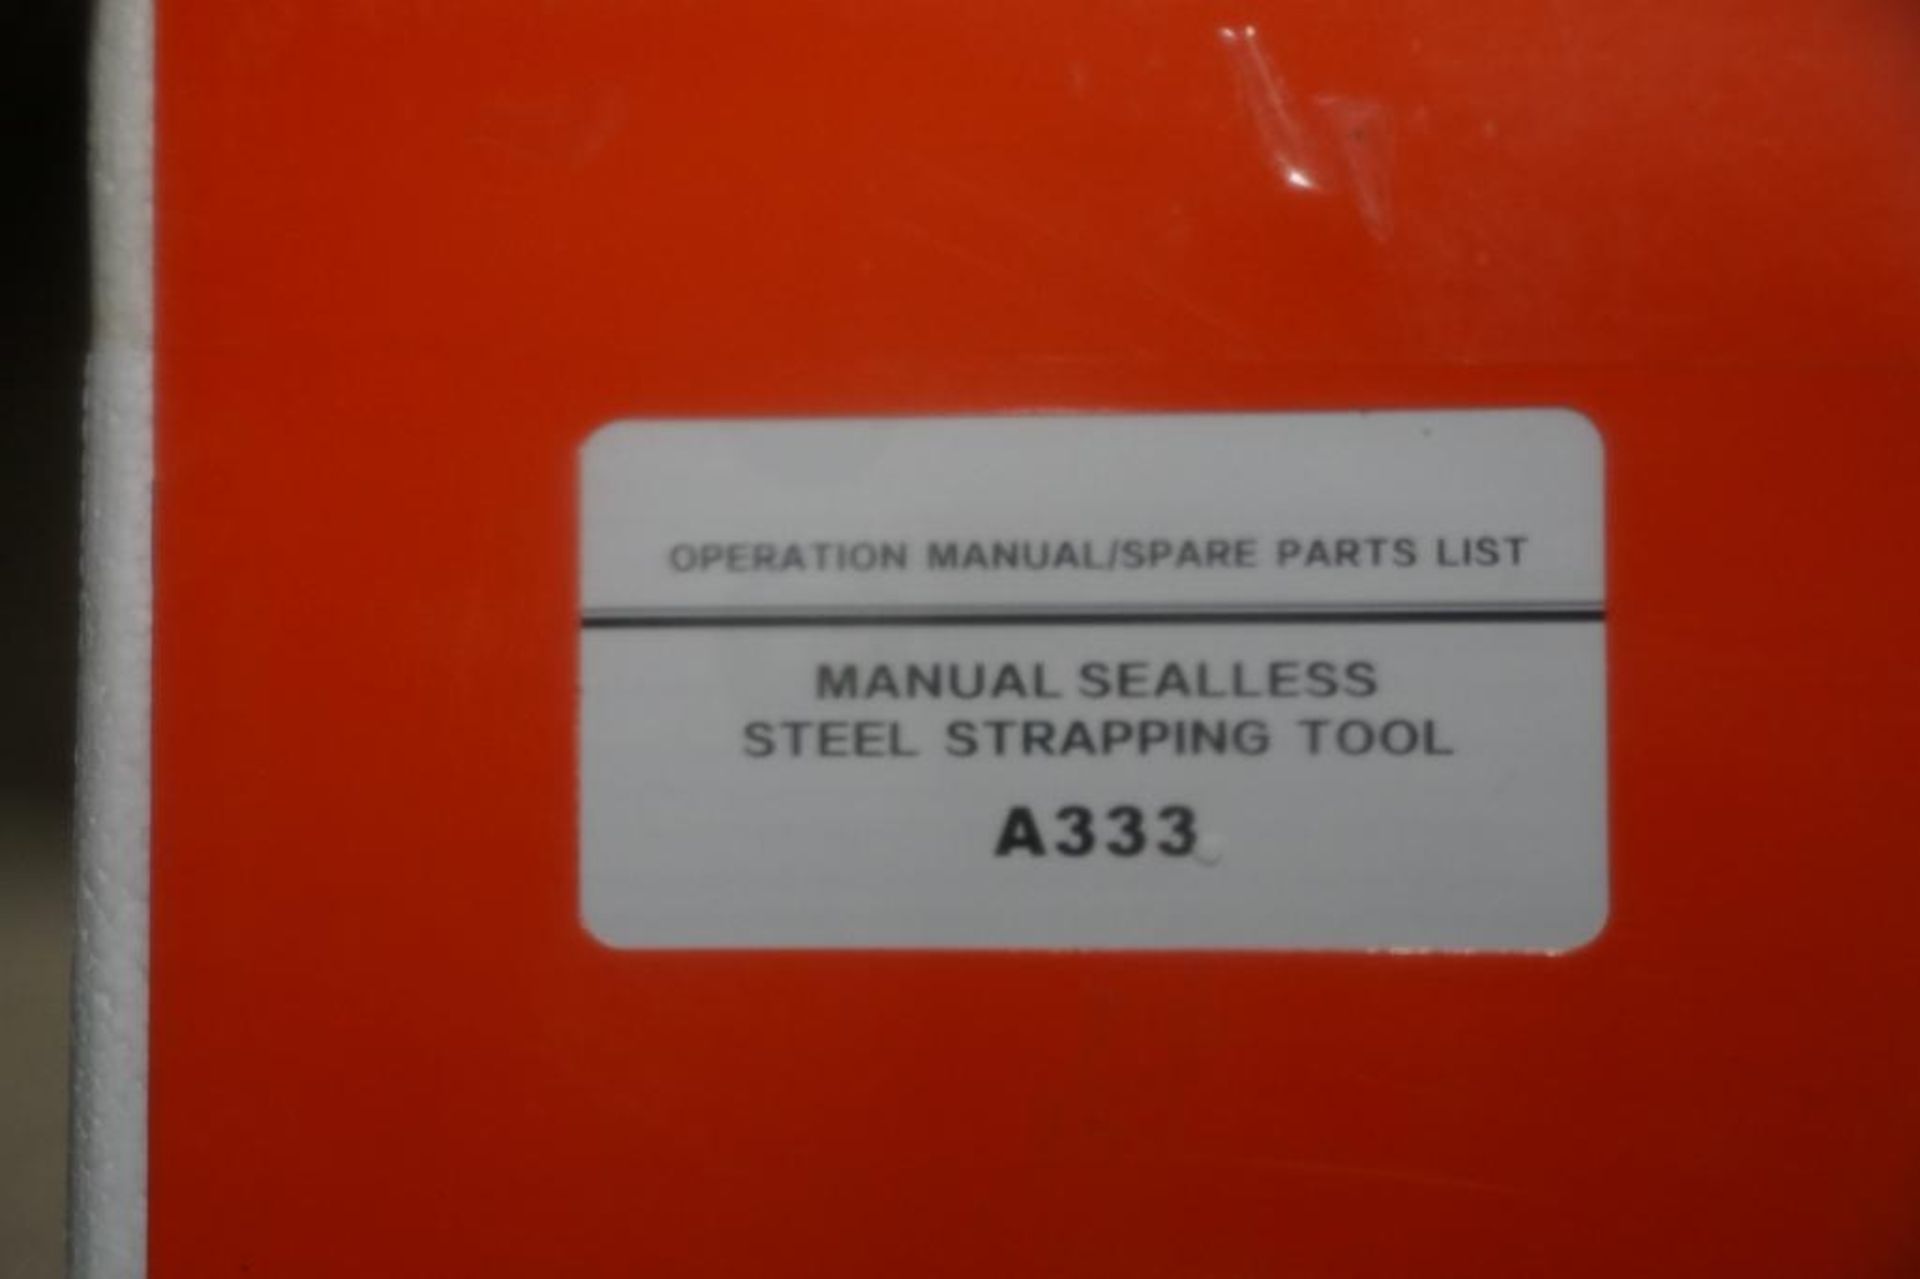 Manual Sealless Steel Strapping Tool - Image 5 of 5